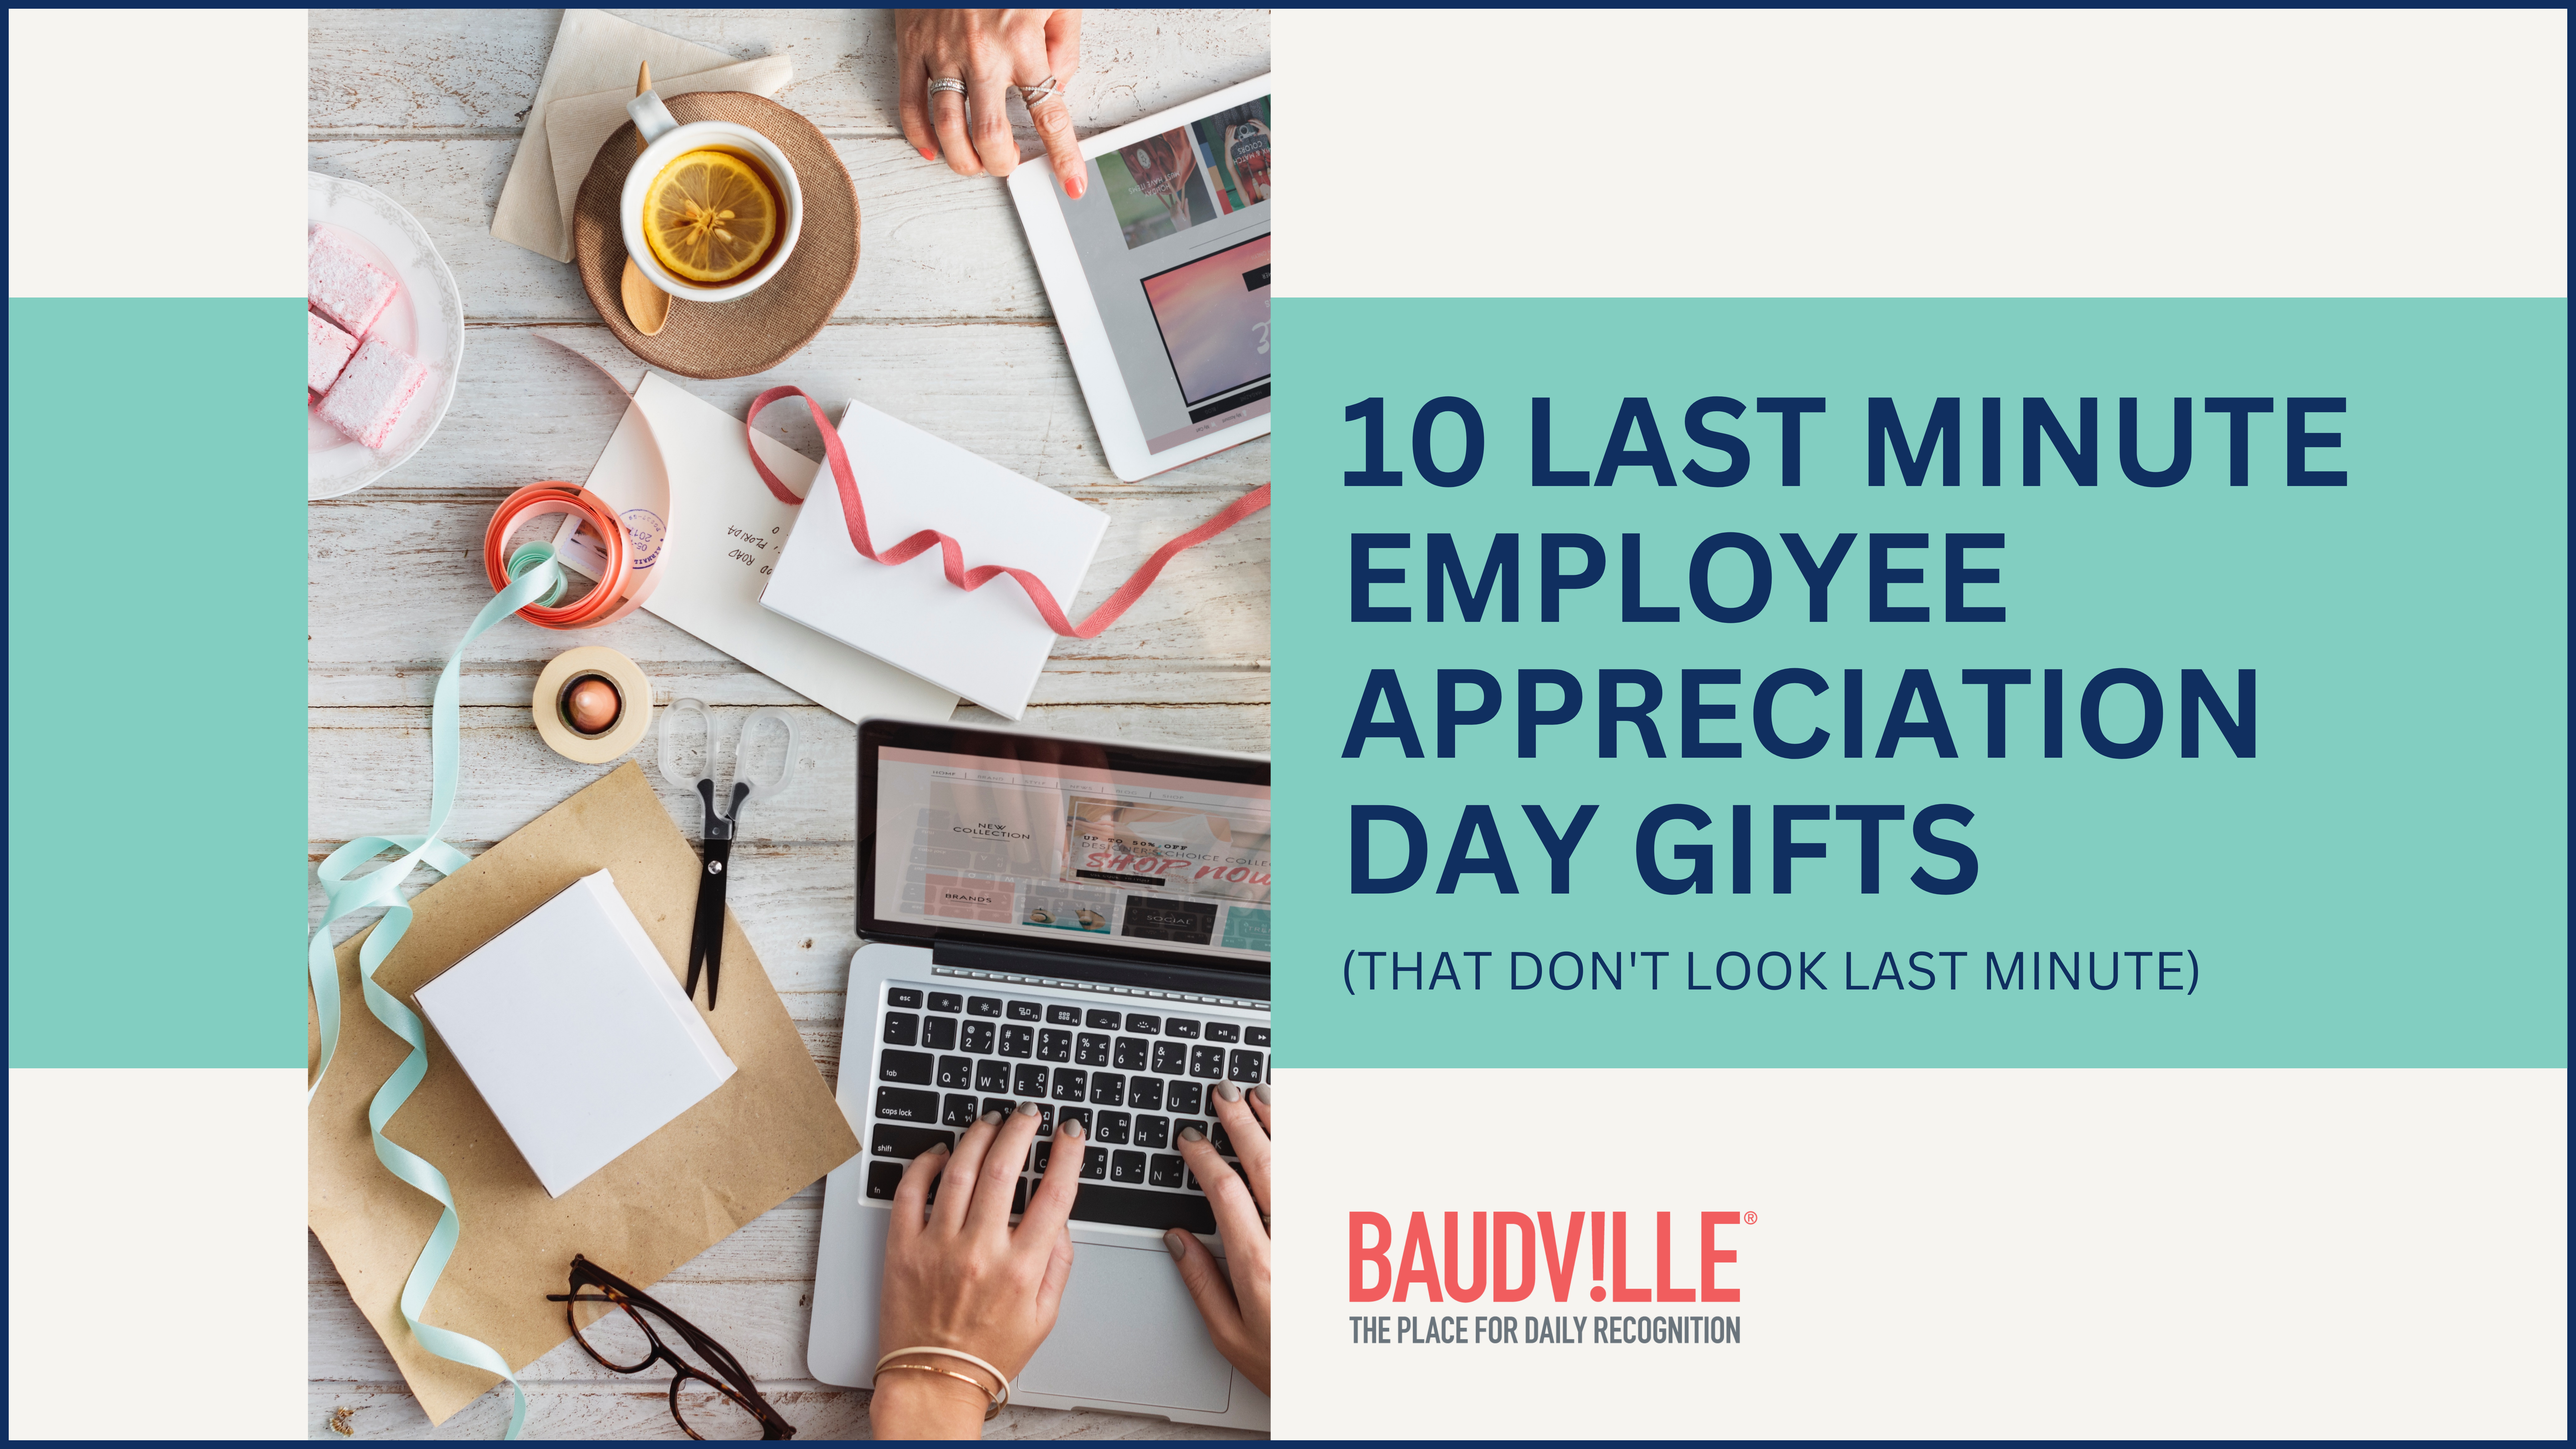 10 Last Minute Employee Appreciation Day Gifts (That Don’t Look Last Minute)